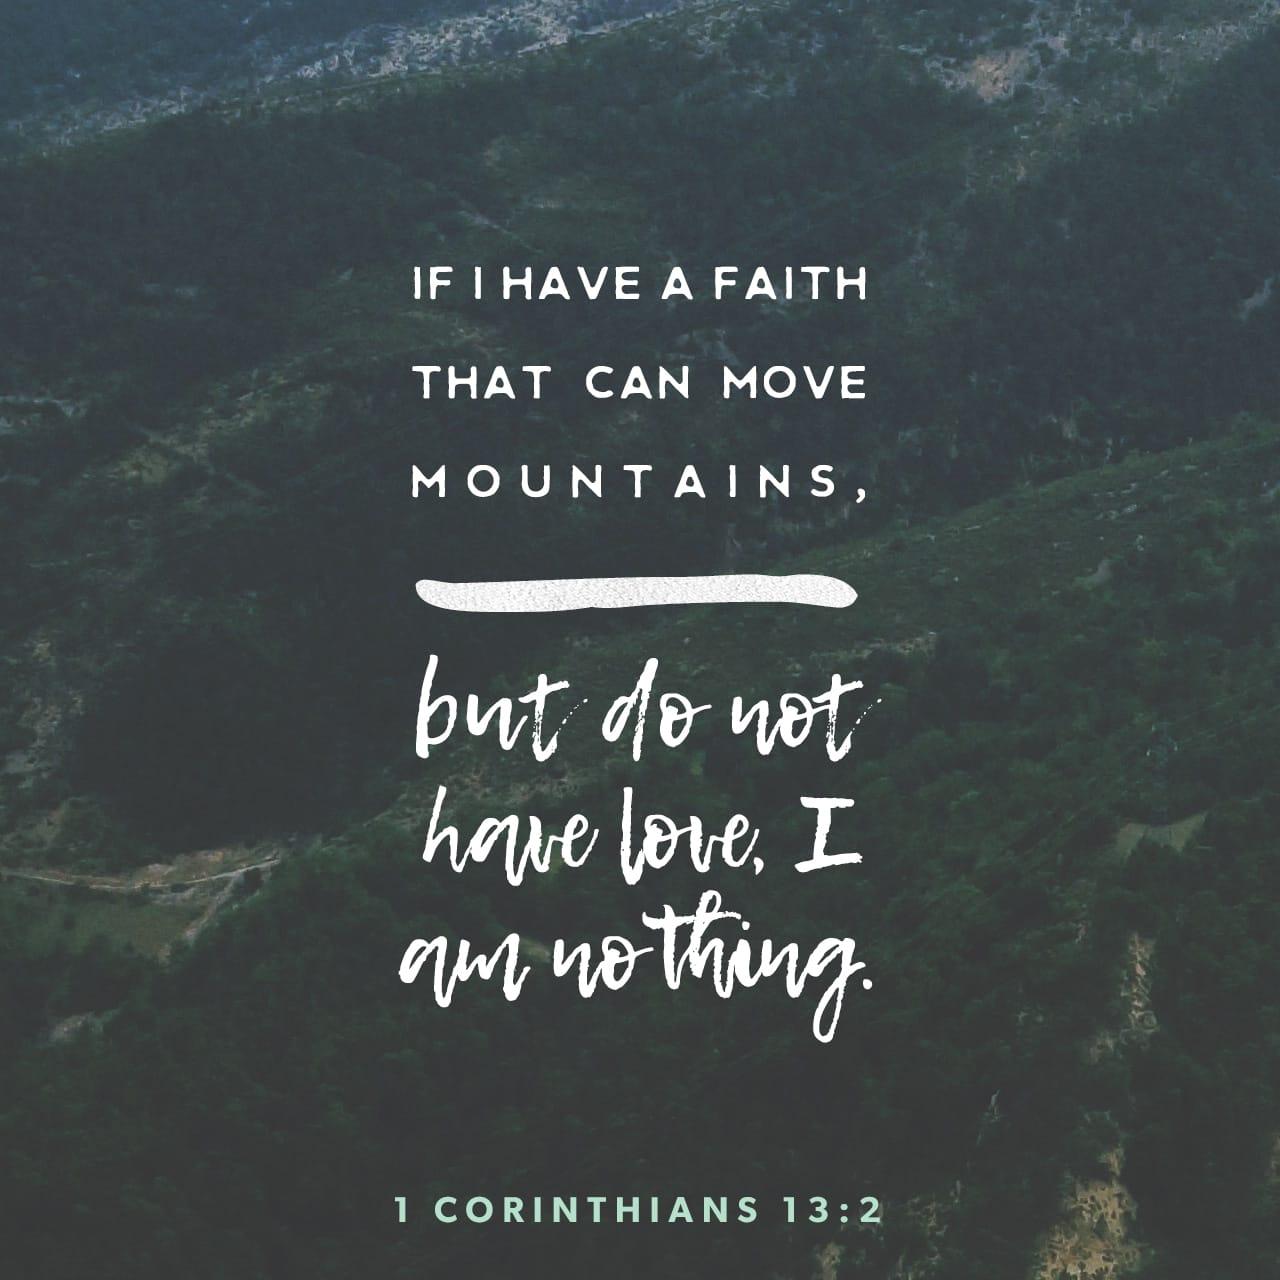 Bible Verse of the Day - day 89 - image 2283 (1 Corinthians 13:1-13)